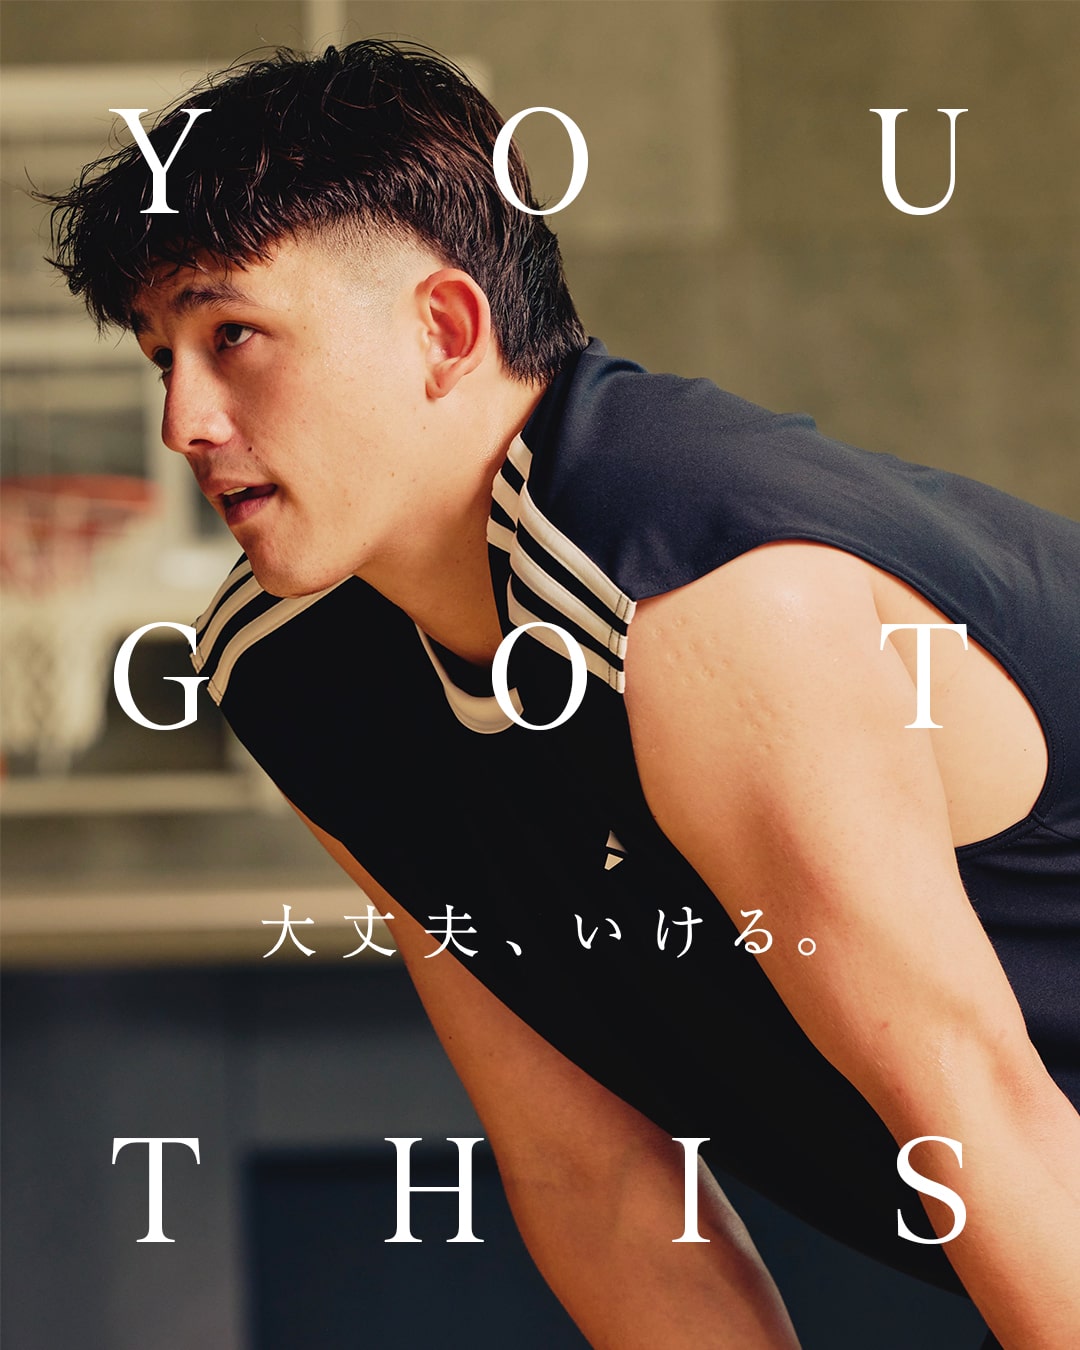 YOU GOT THIS 大丈夫、いける。